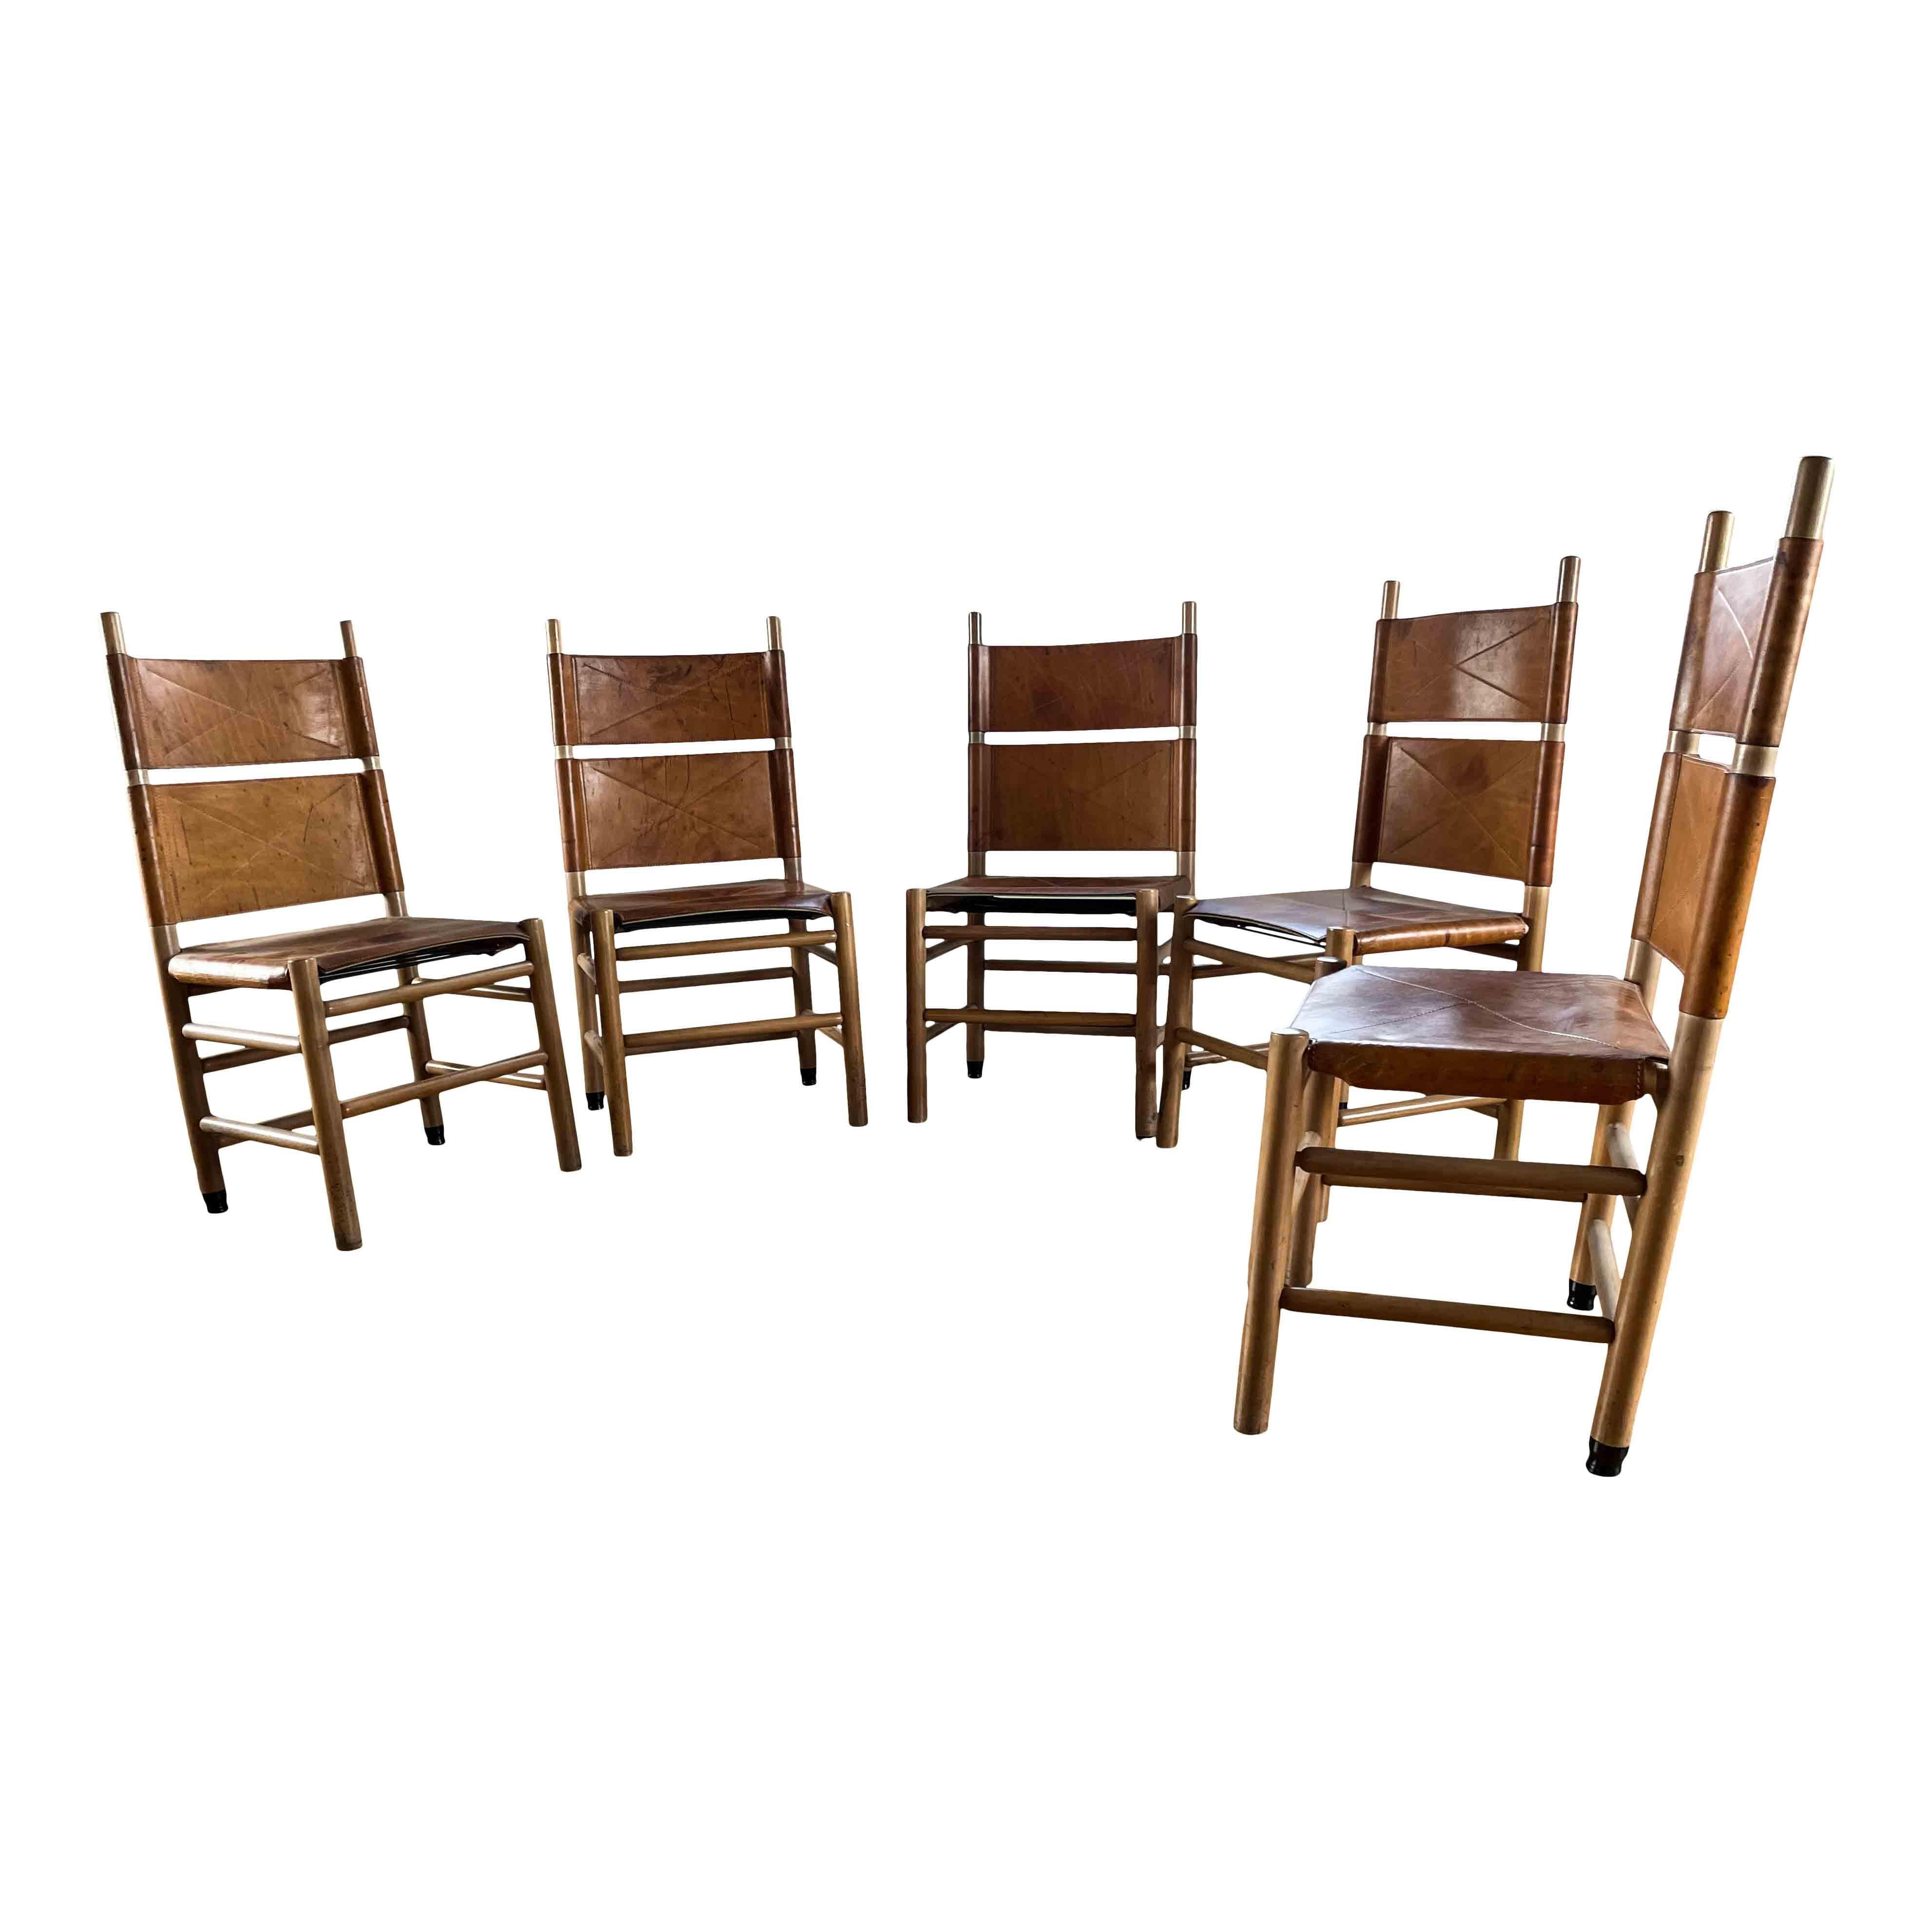 Carlo Scarpa Cognac Leather “Kentucky” Dining Chair for Bernini, 1977, Set of 5 For Sale 1